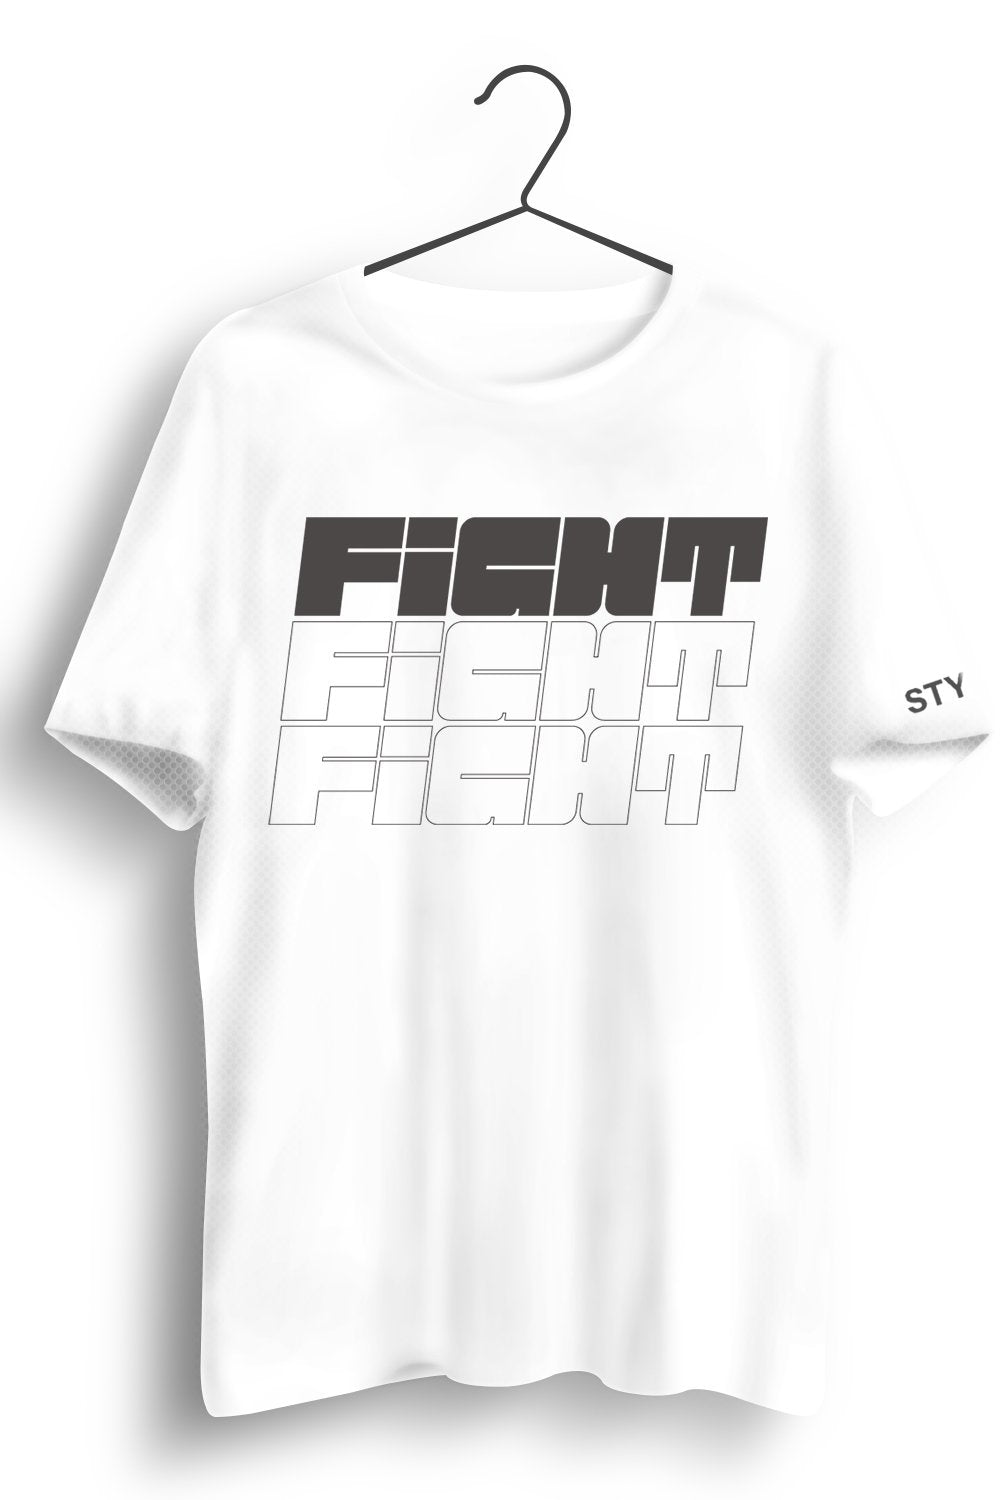 Fight Printed White Dry Fit Tee